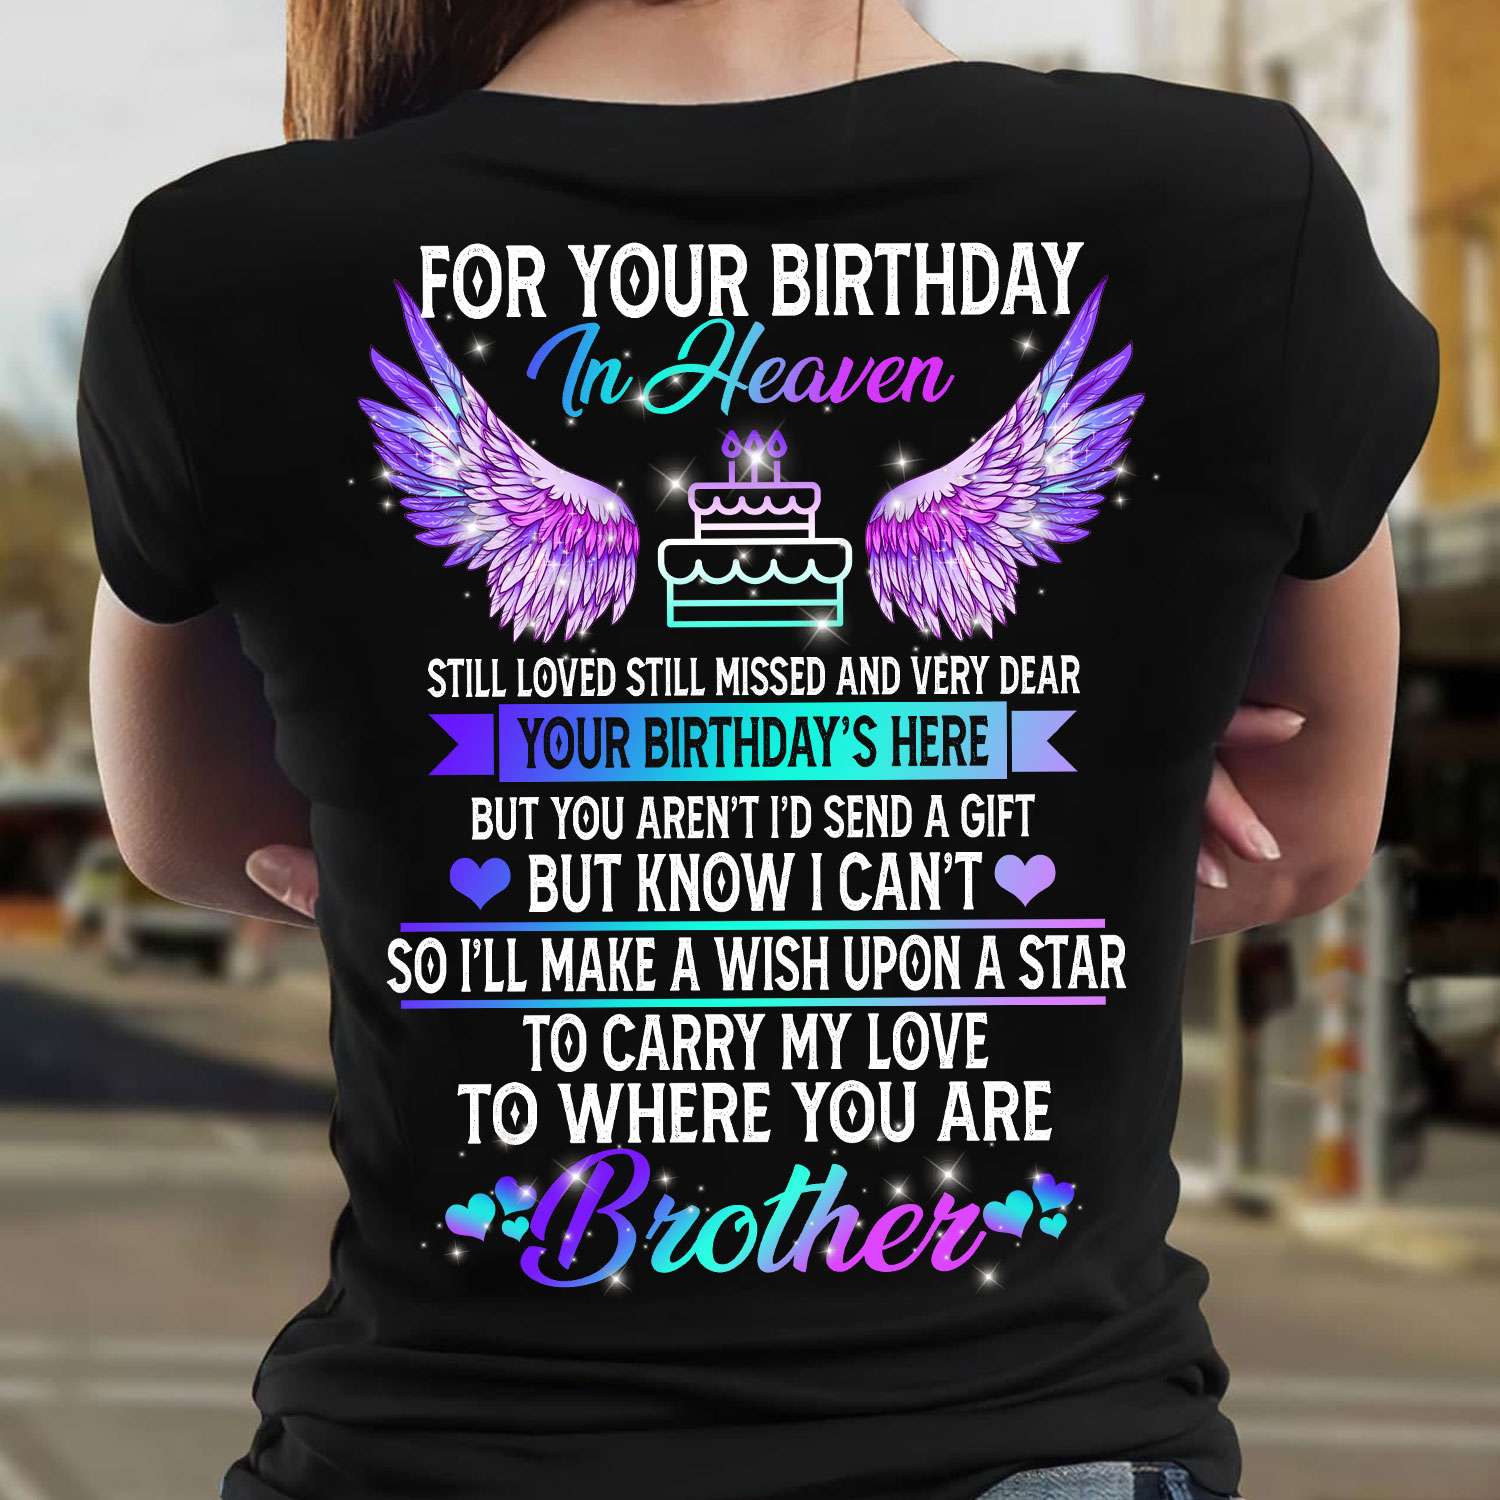 For your birthday in heaven - Brother in heaven, Birthday of Brother